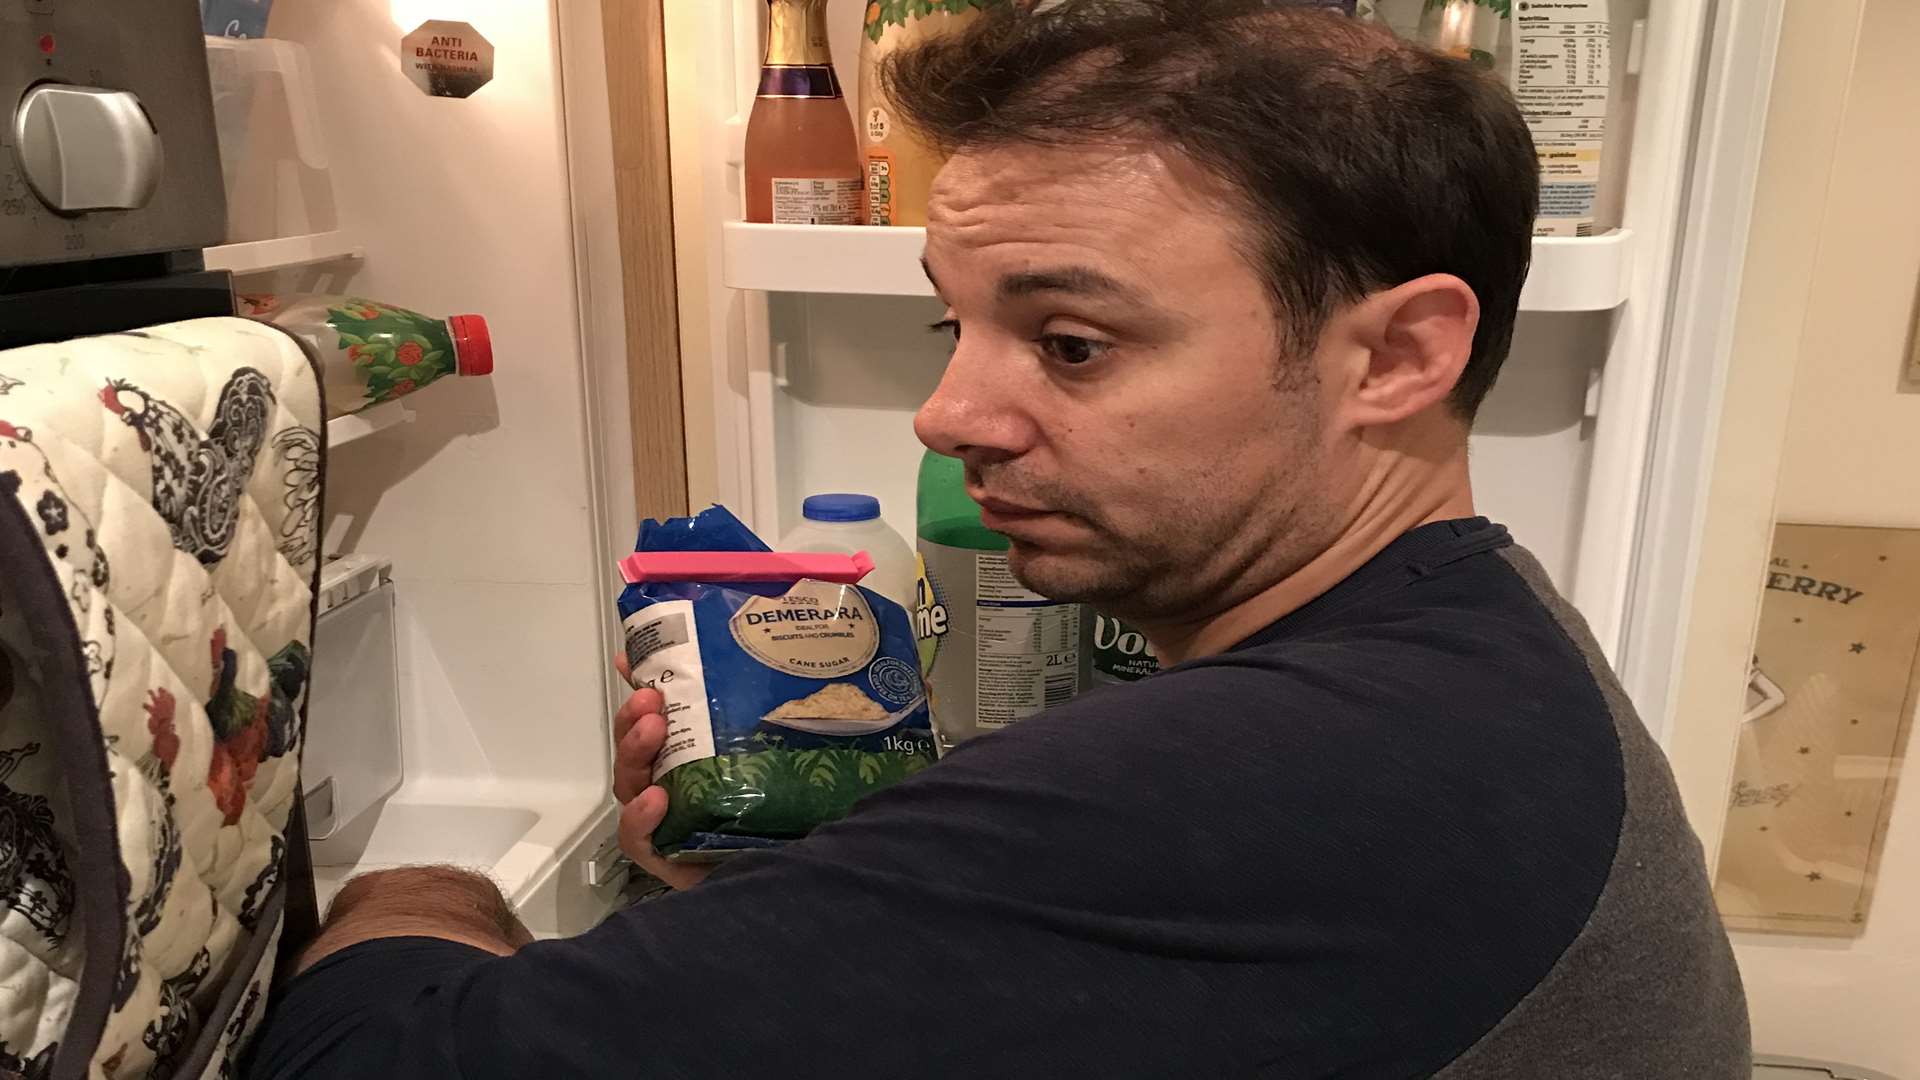 My husband Jay tried to put the sugar in the fridge - we're not sure why!